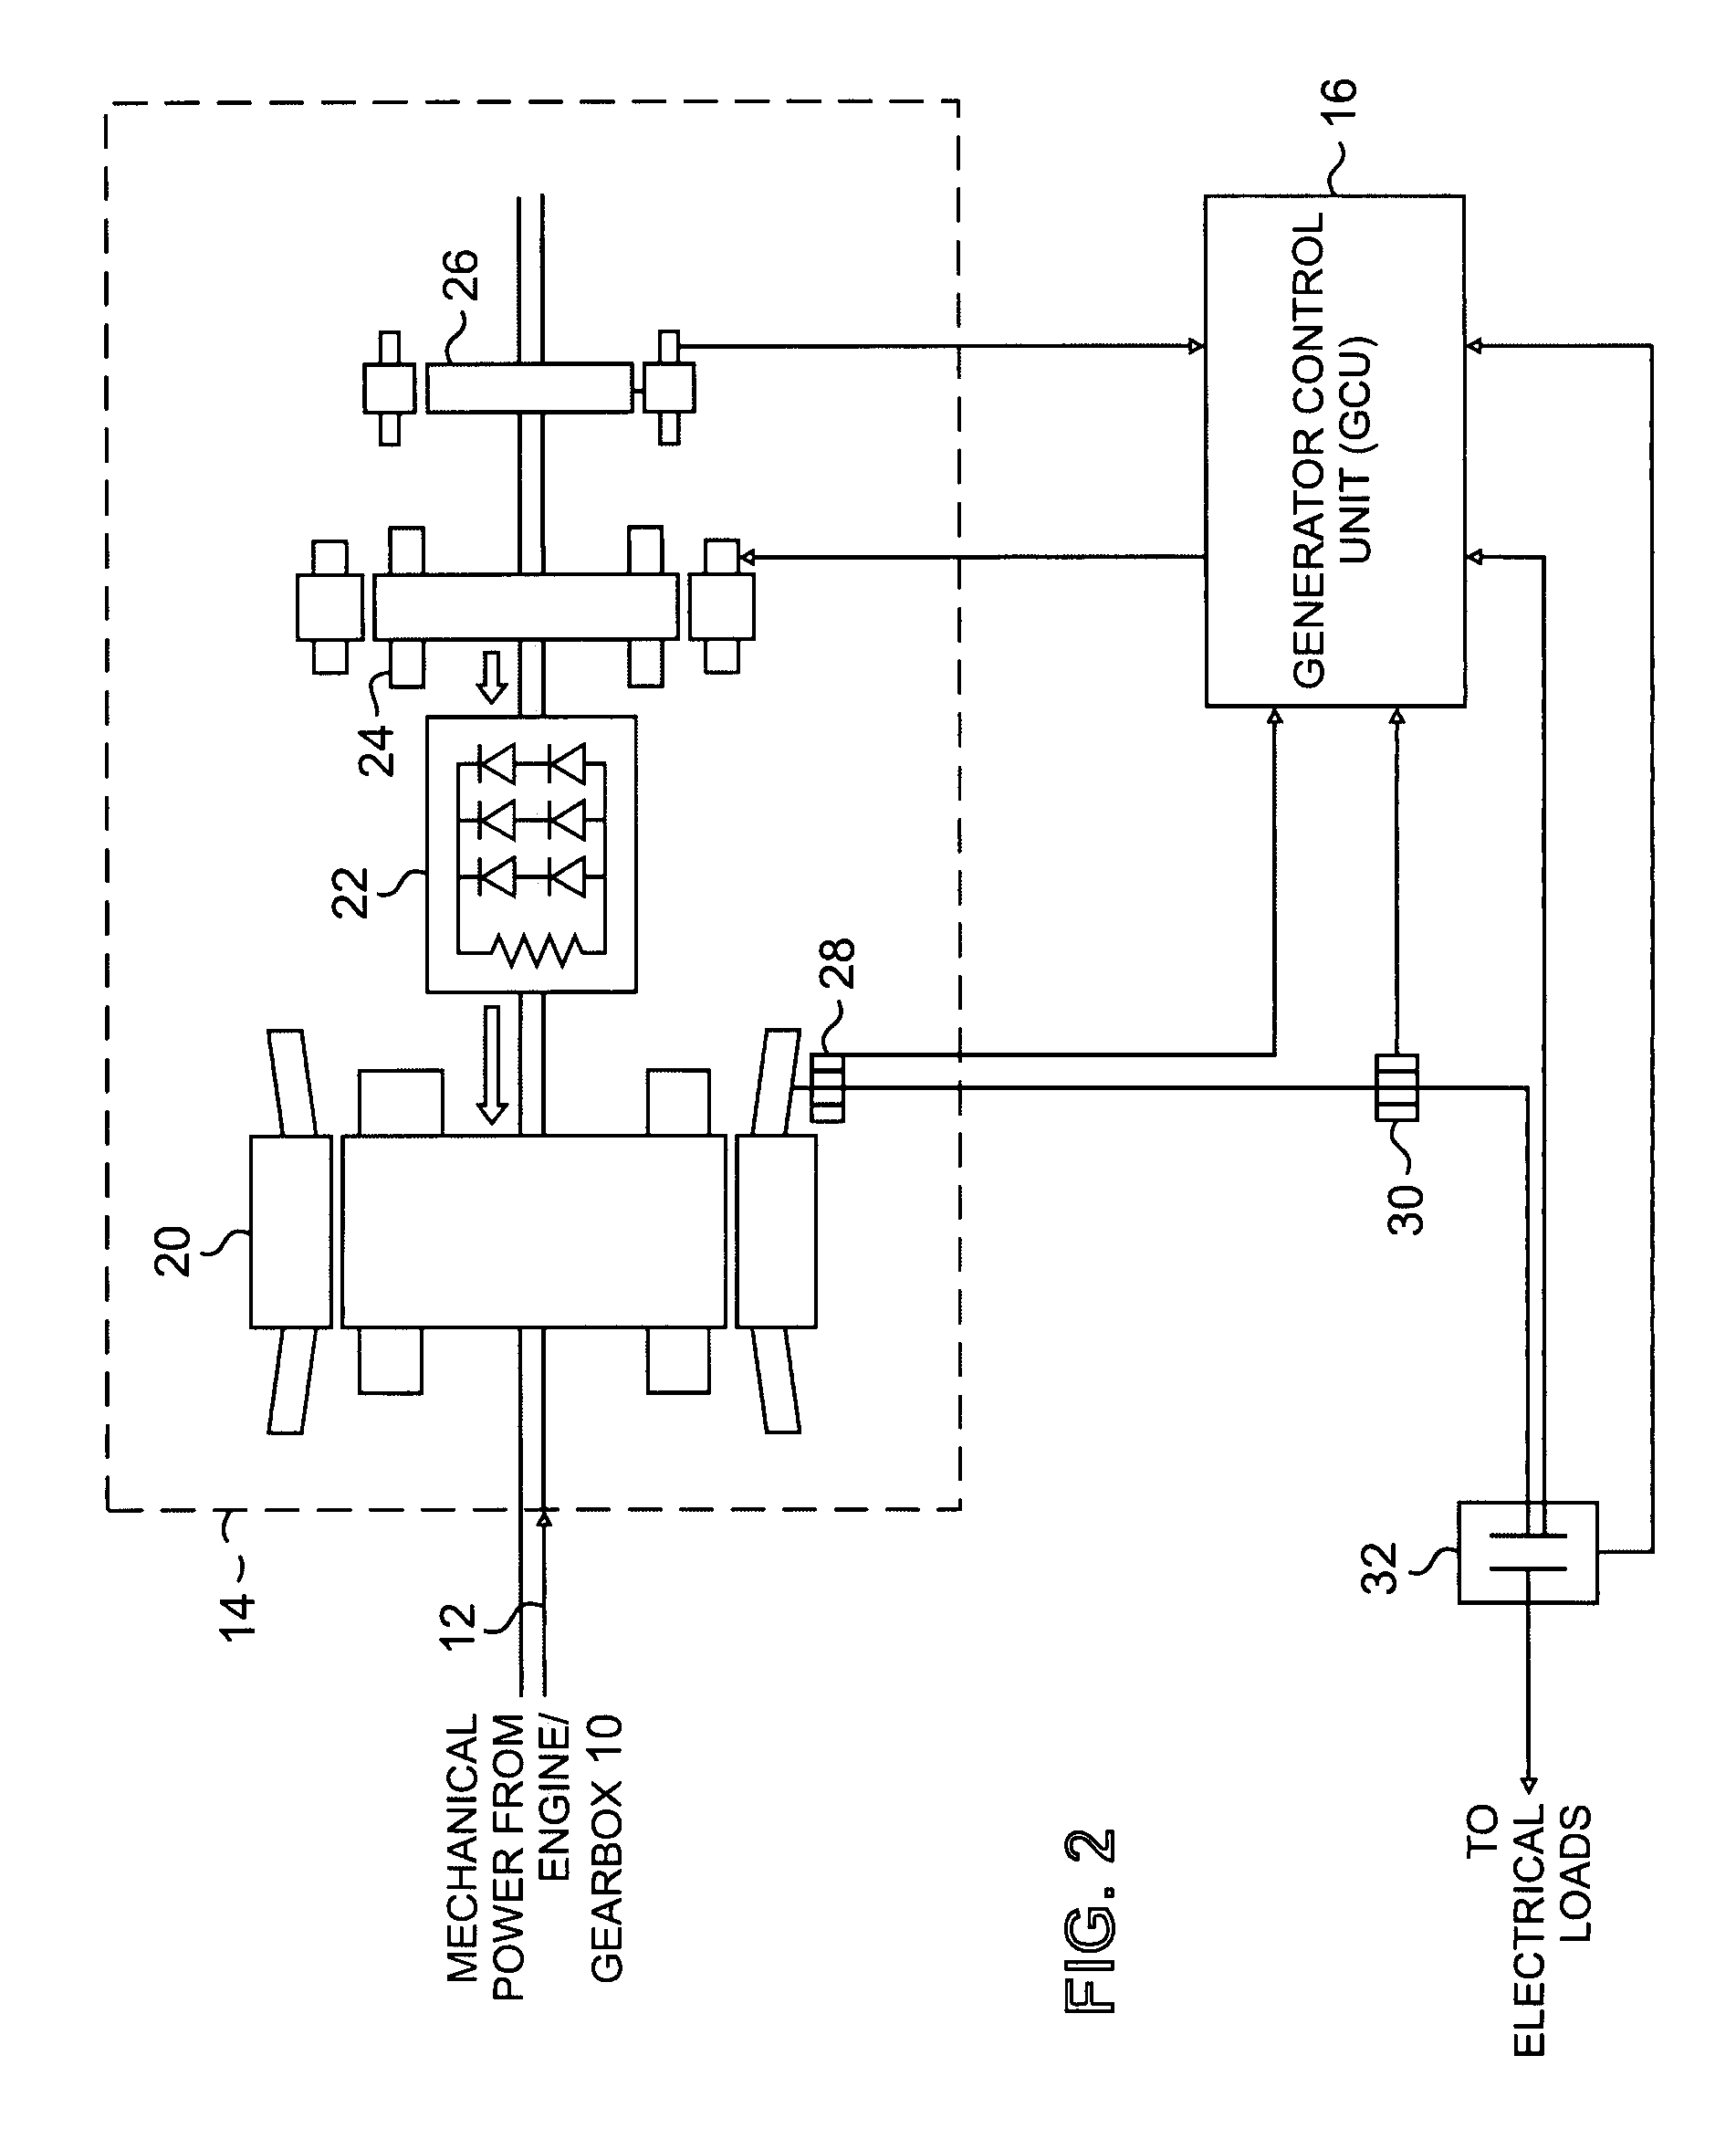 Active damping for synchronous generator torsional oscillations